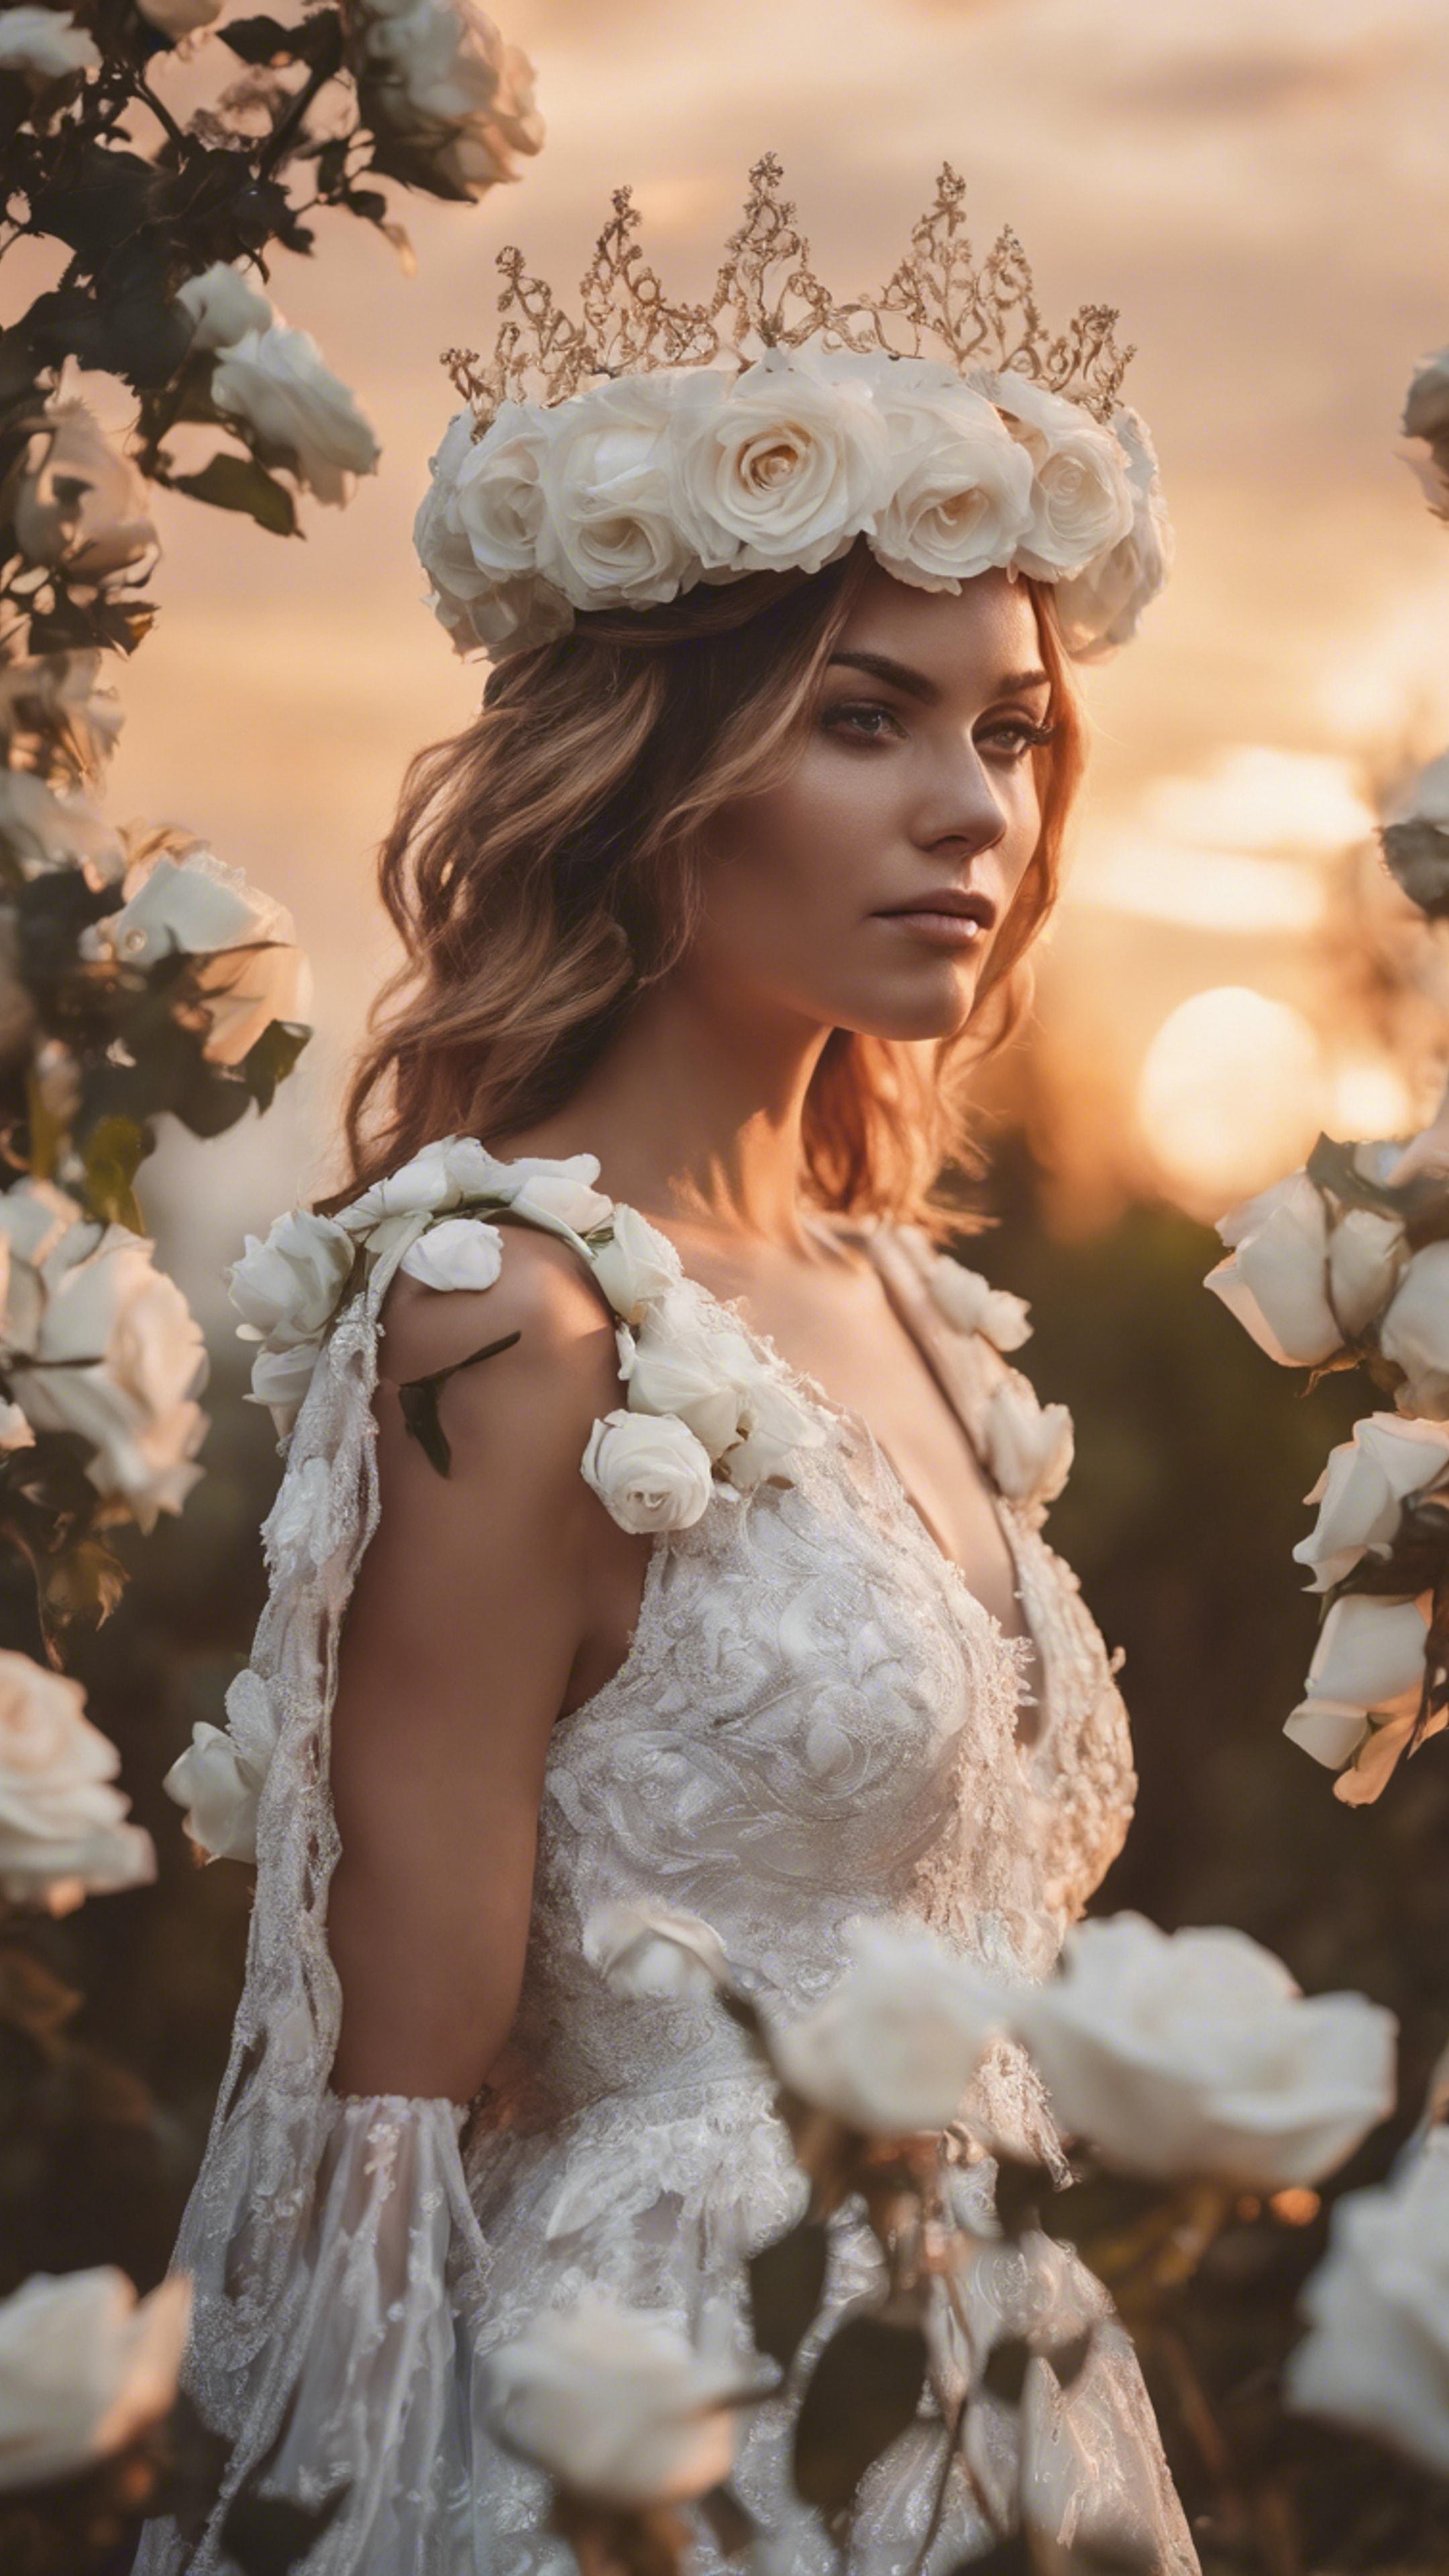 A woman wearing a crown made of white roses against a sunset backdrop.壁紙[eb1addcf47fd4efbbc26]